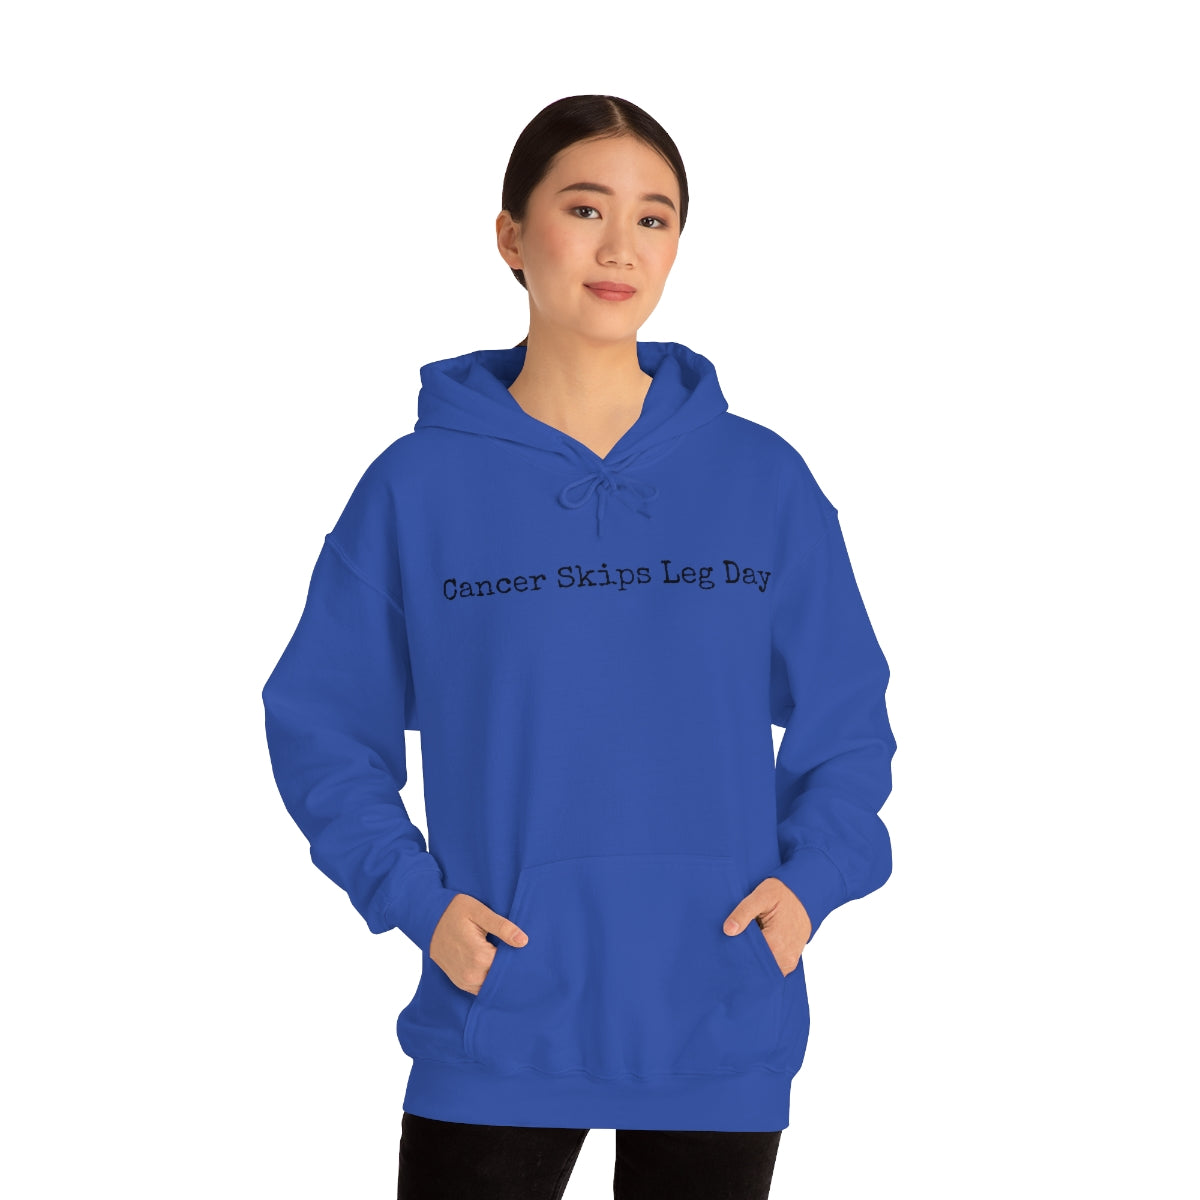 Unisex Heavy Blend™ Hooded Sweatshirt Mens Womens Apparel Clothing Anti Cancer Cancer is Dumb Survivor Support Humorous Funny